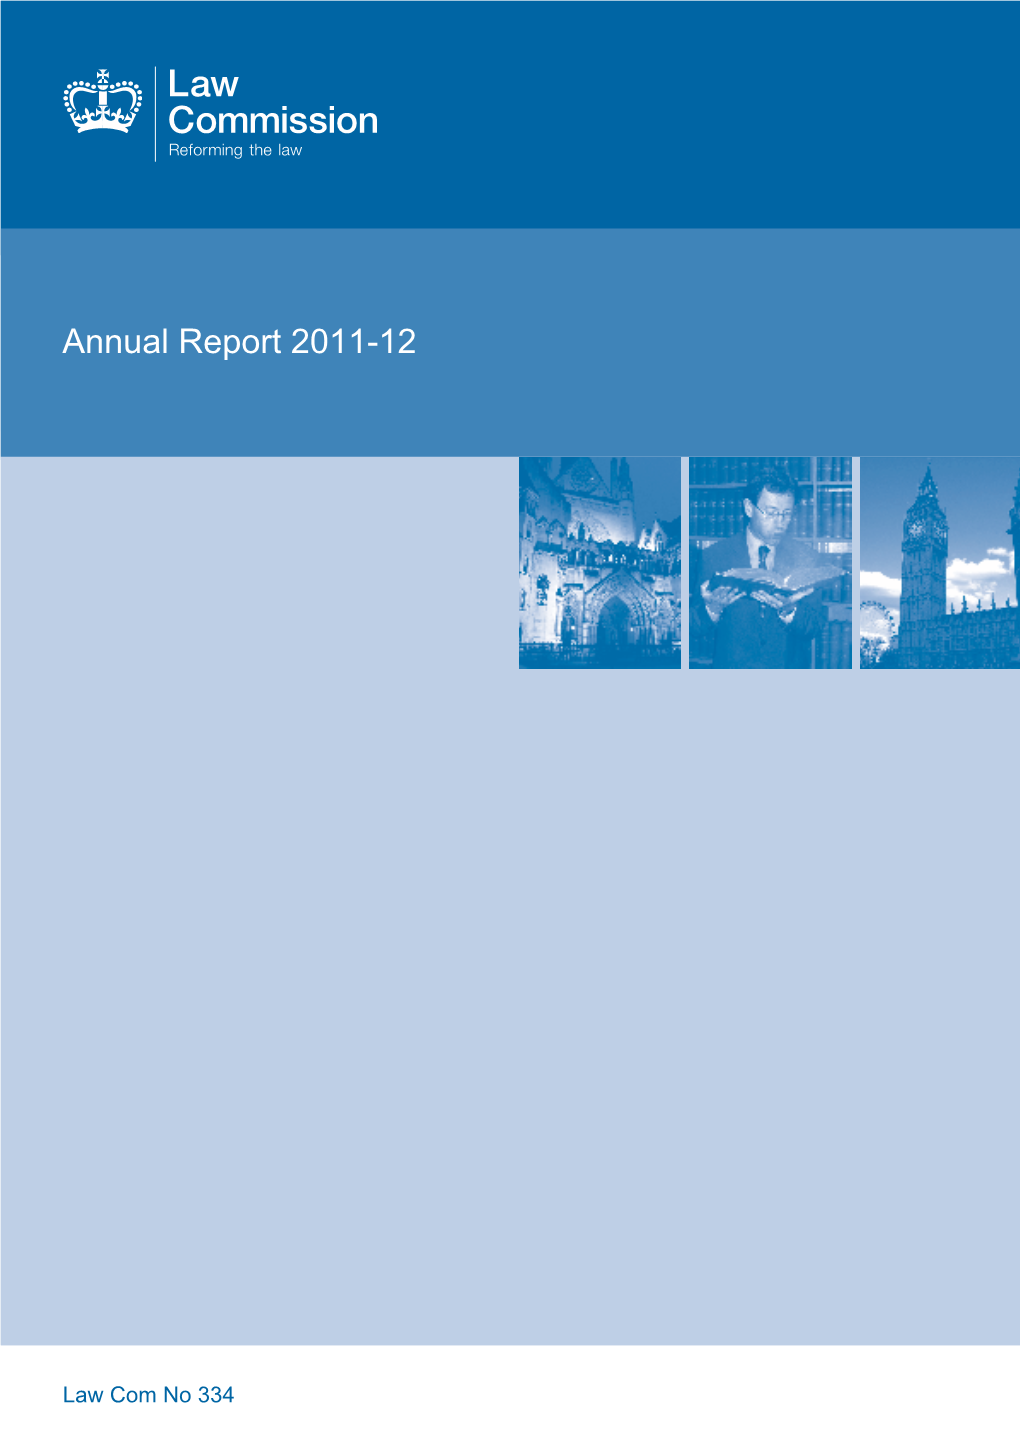 The Law Commission Annual Report 2011-12